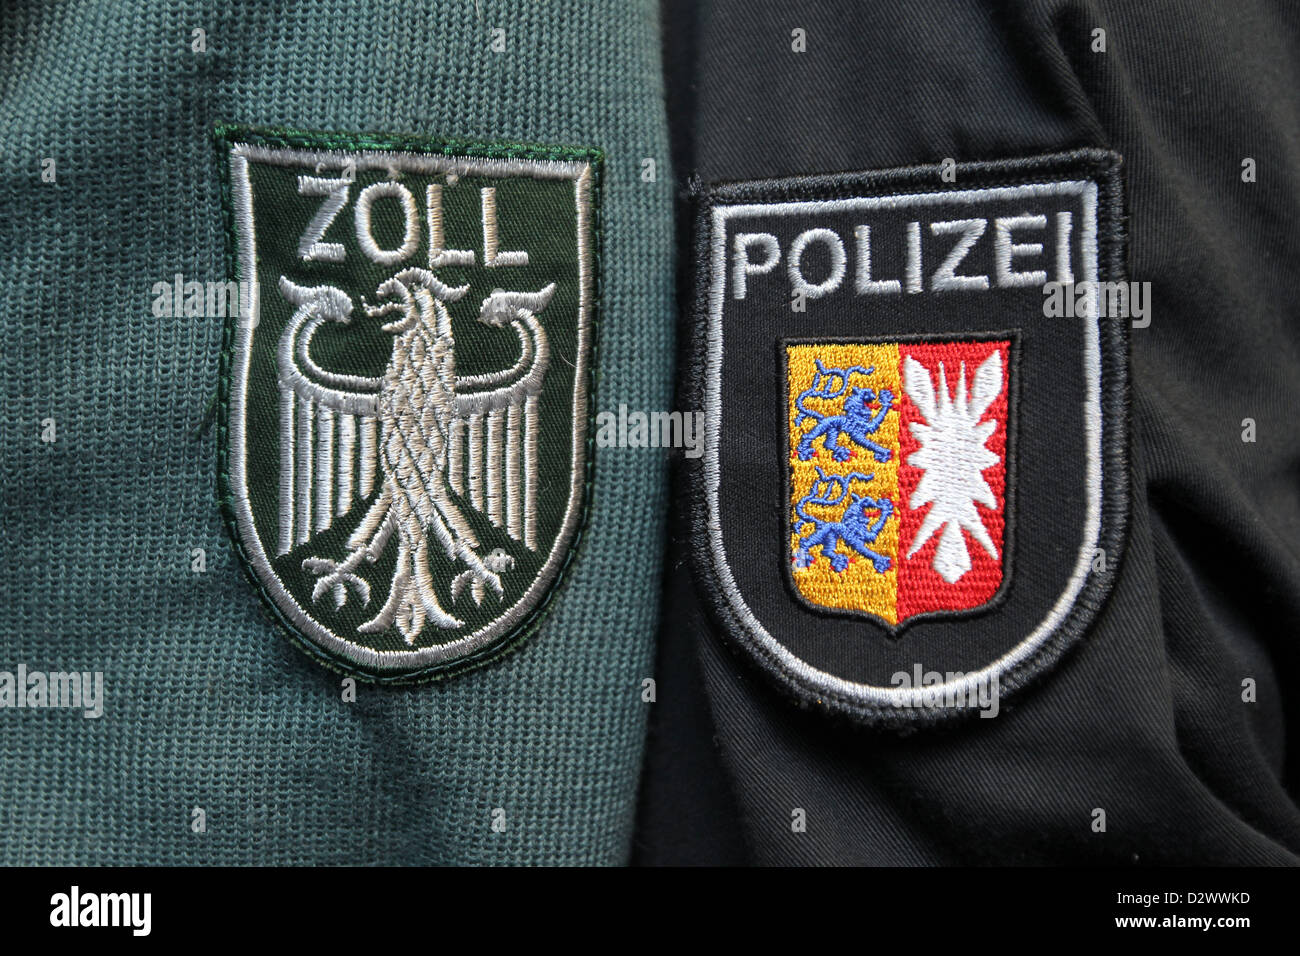 Tarp, Germany, Schleswig-Holstein Coat of police and customs on sleeves Stock Photo